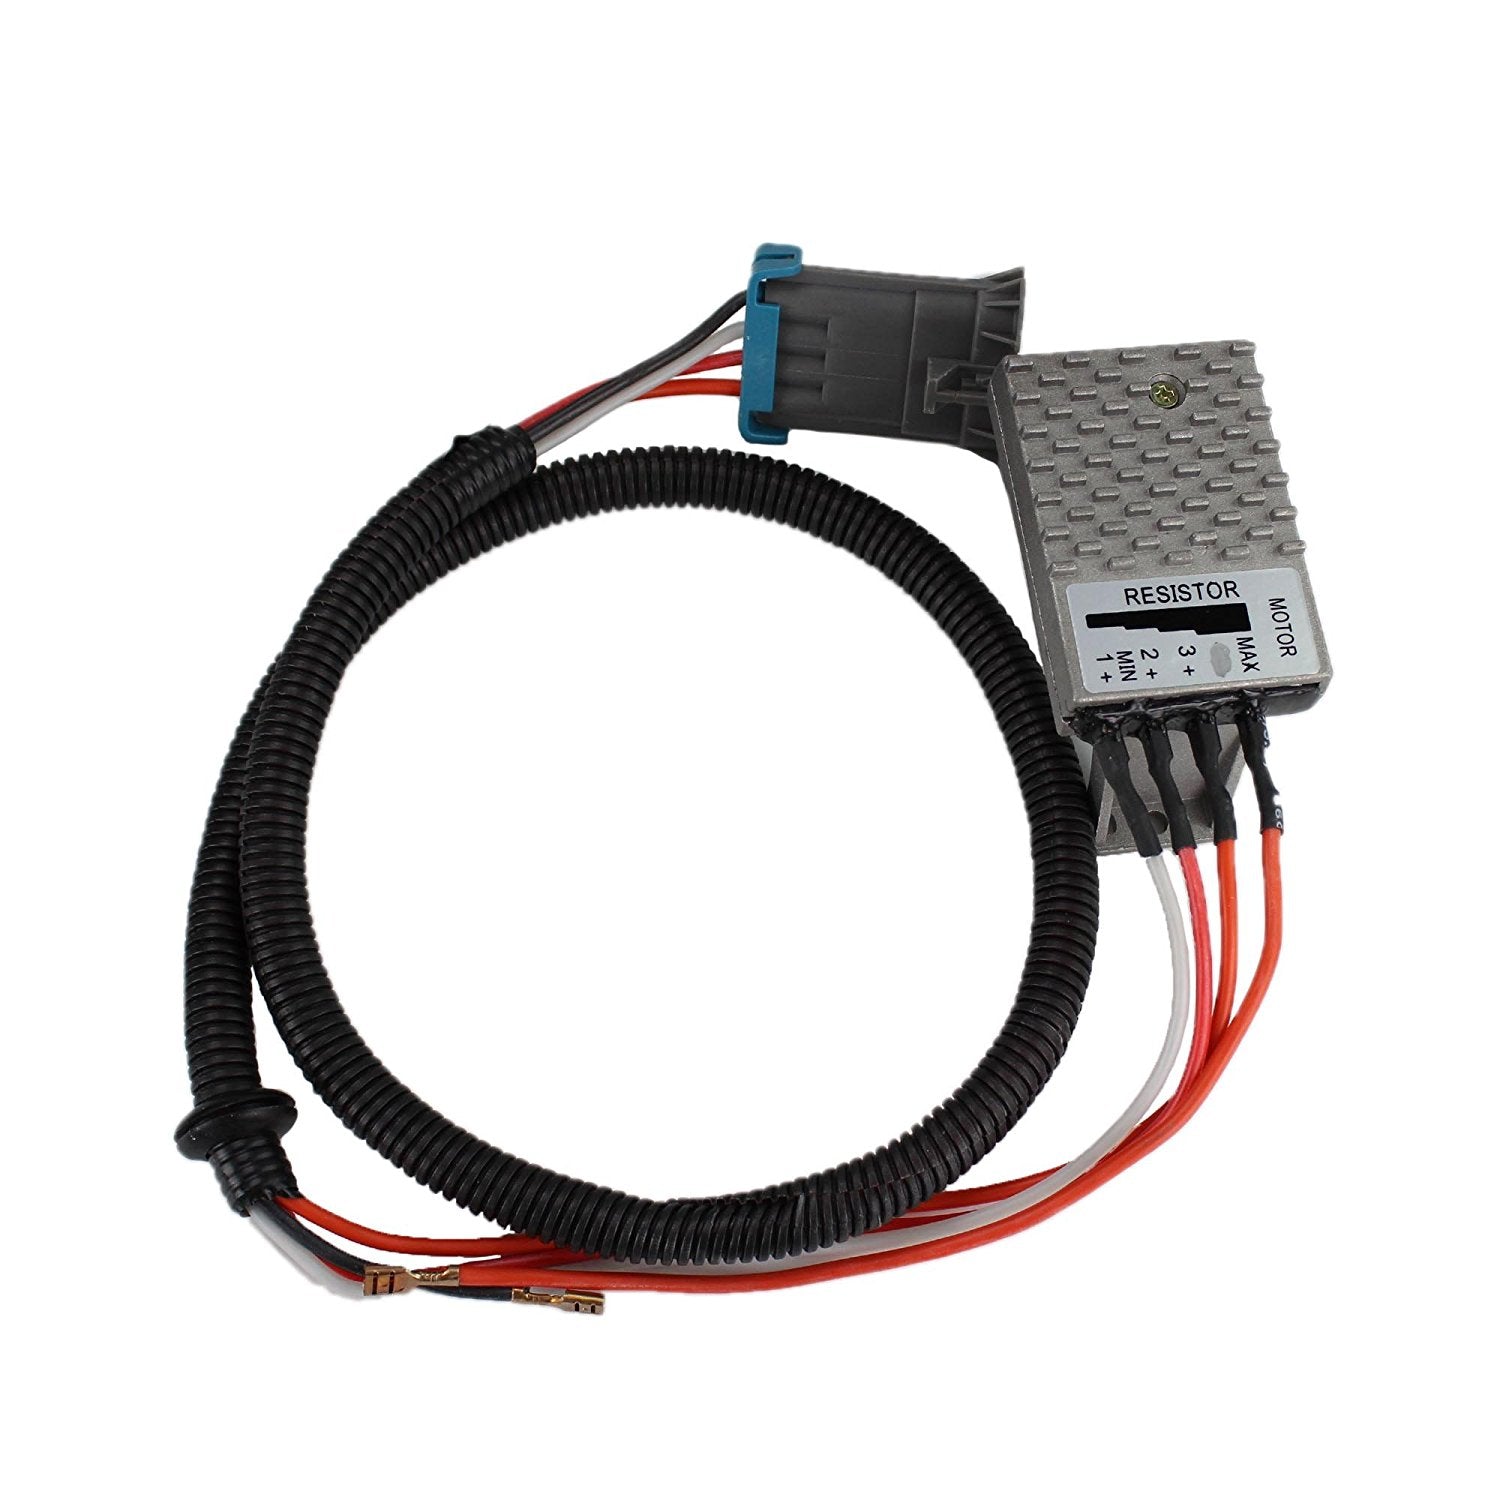 7010164, Blower Speed Resistor with Wire Harness For Bobcat | DURAFORCE INC